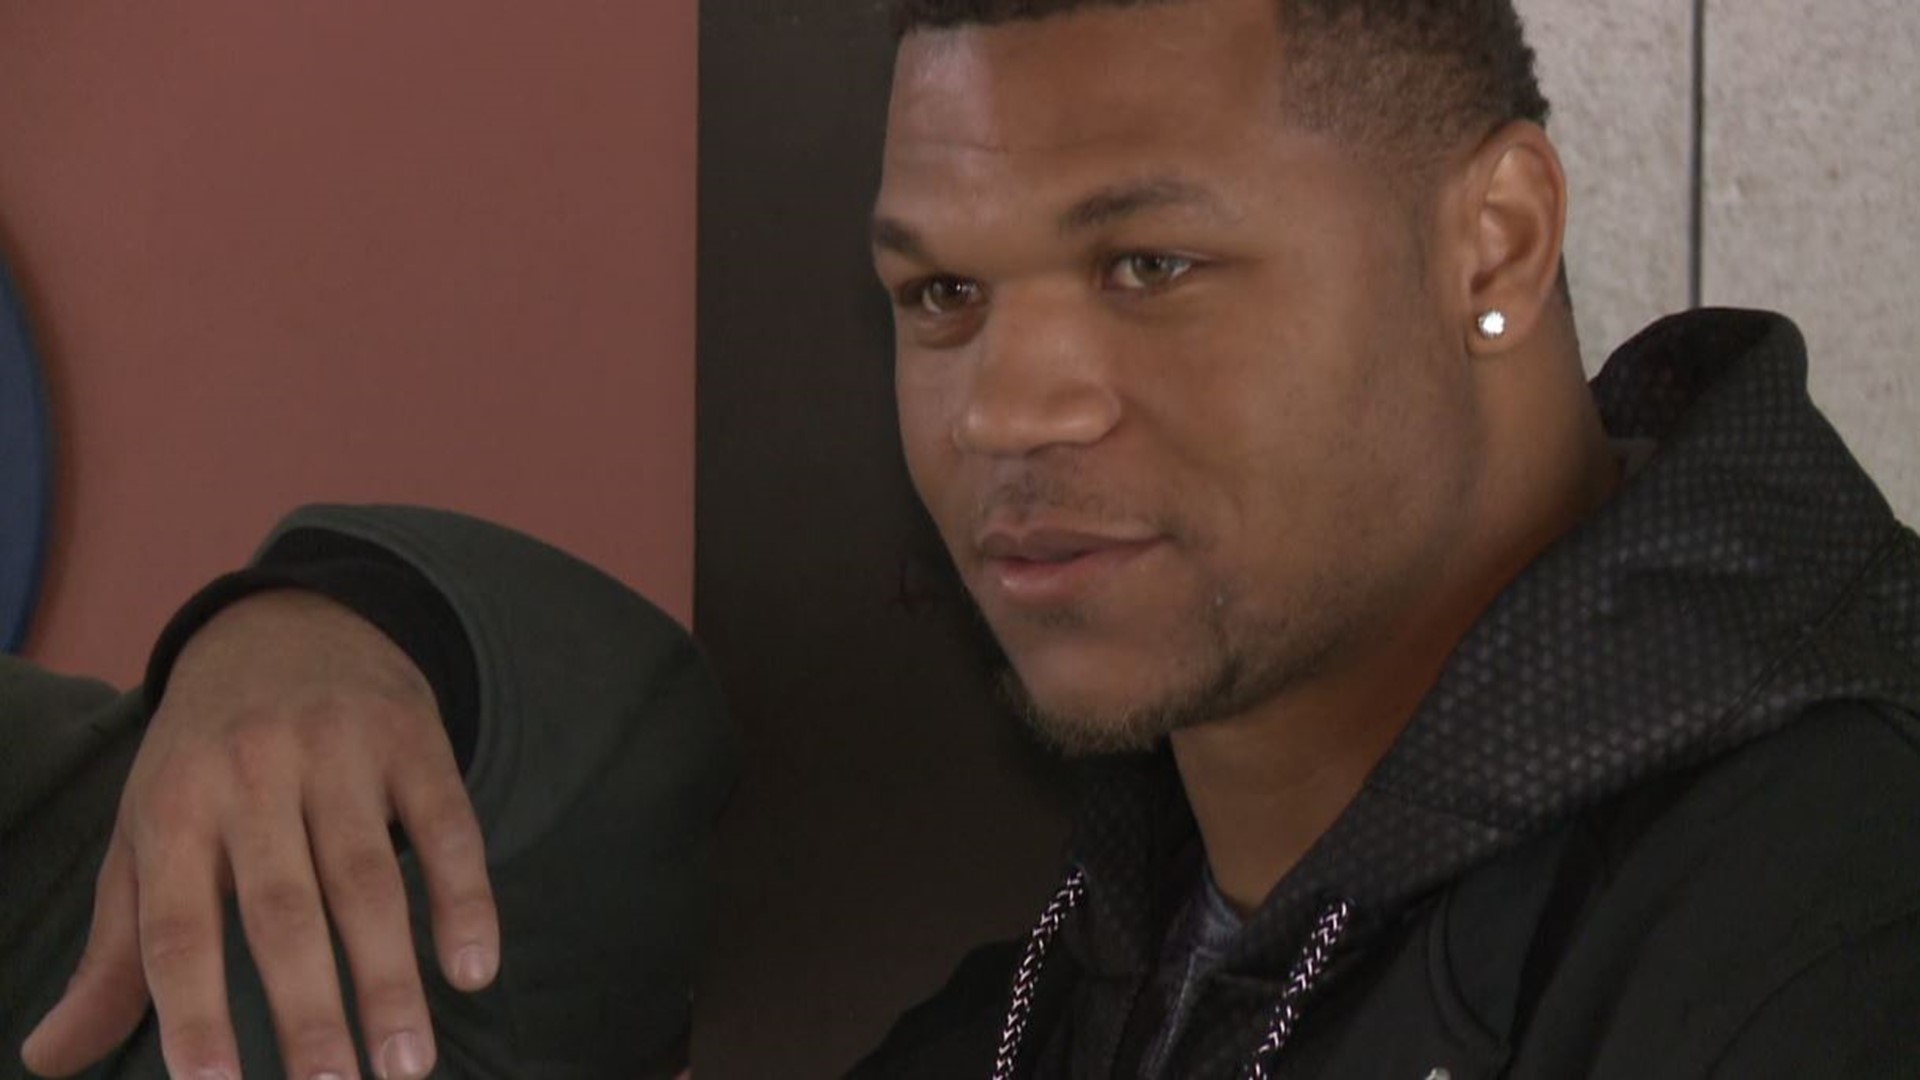 Sacramento native & former Denver Broncos RB Devontae Booker joins ABC10's Sean Cunningham to talk about his new opportunity with the Las Vegas Raiders.